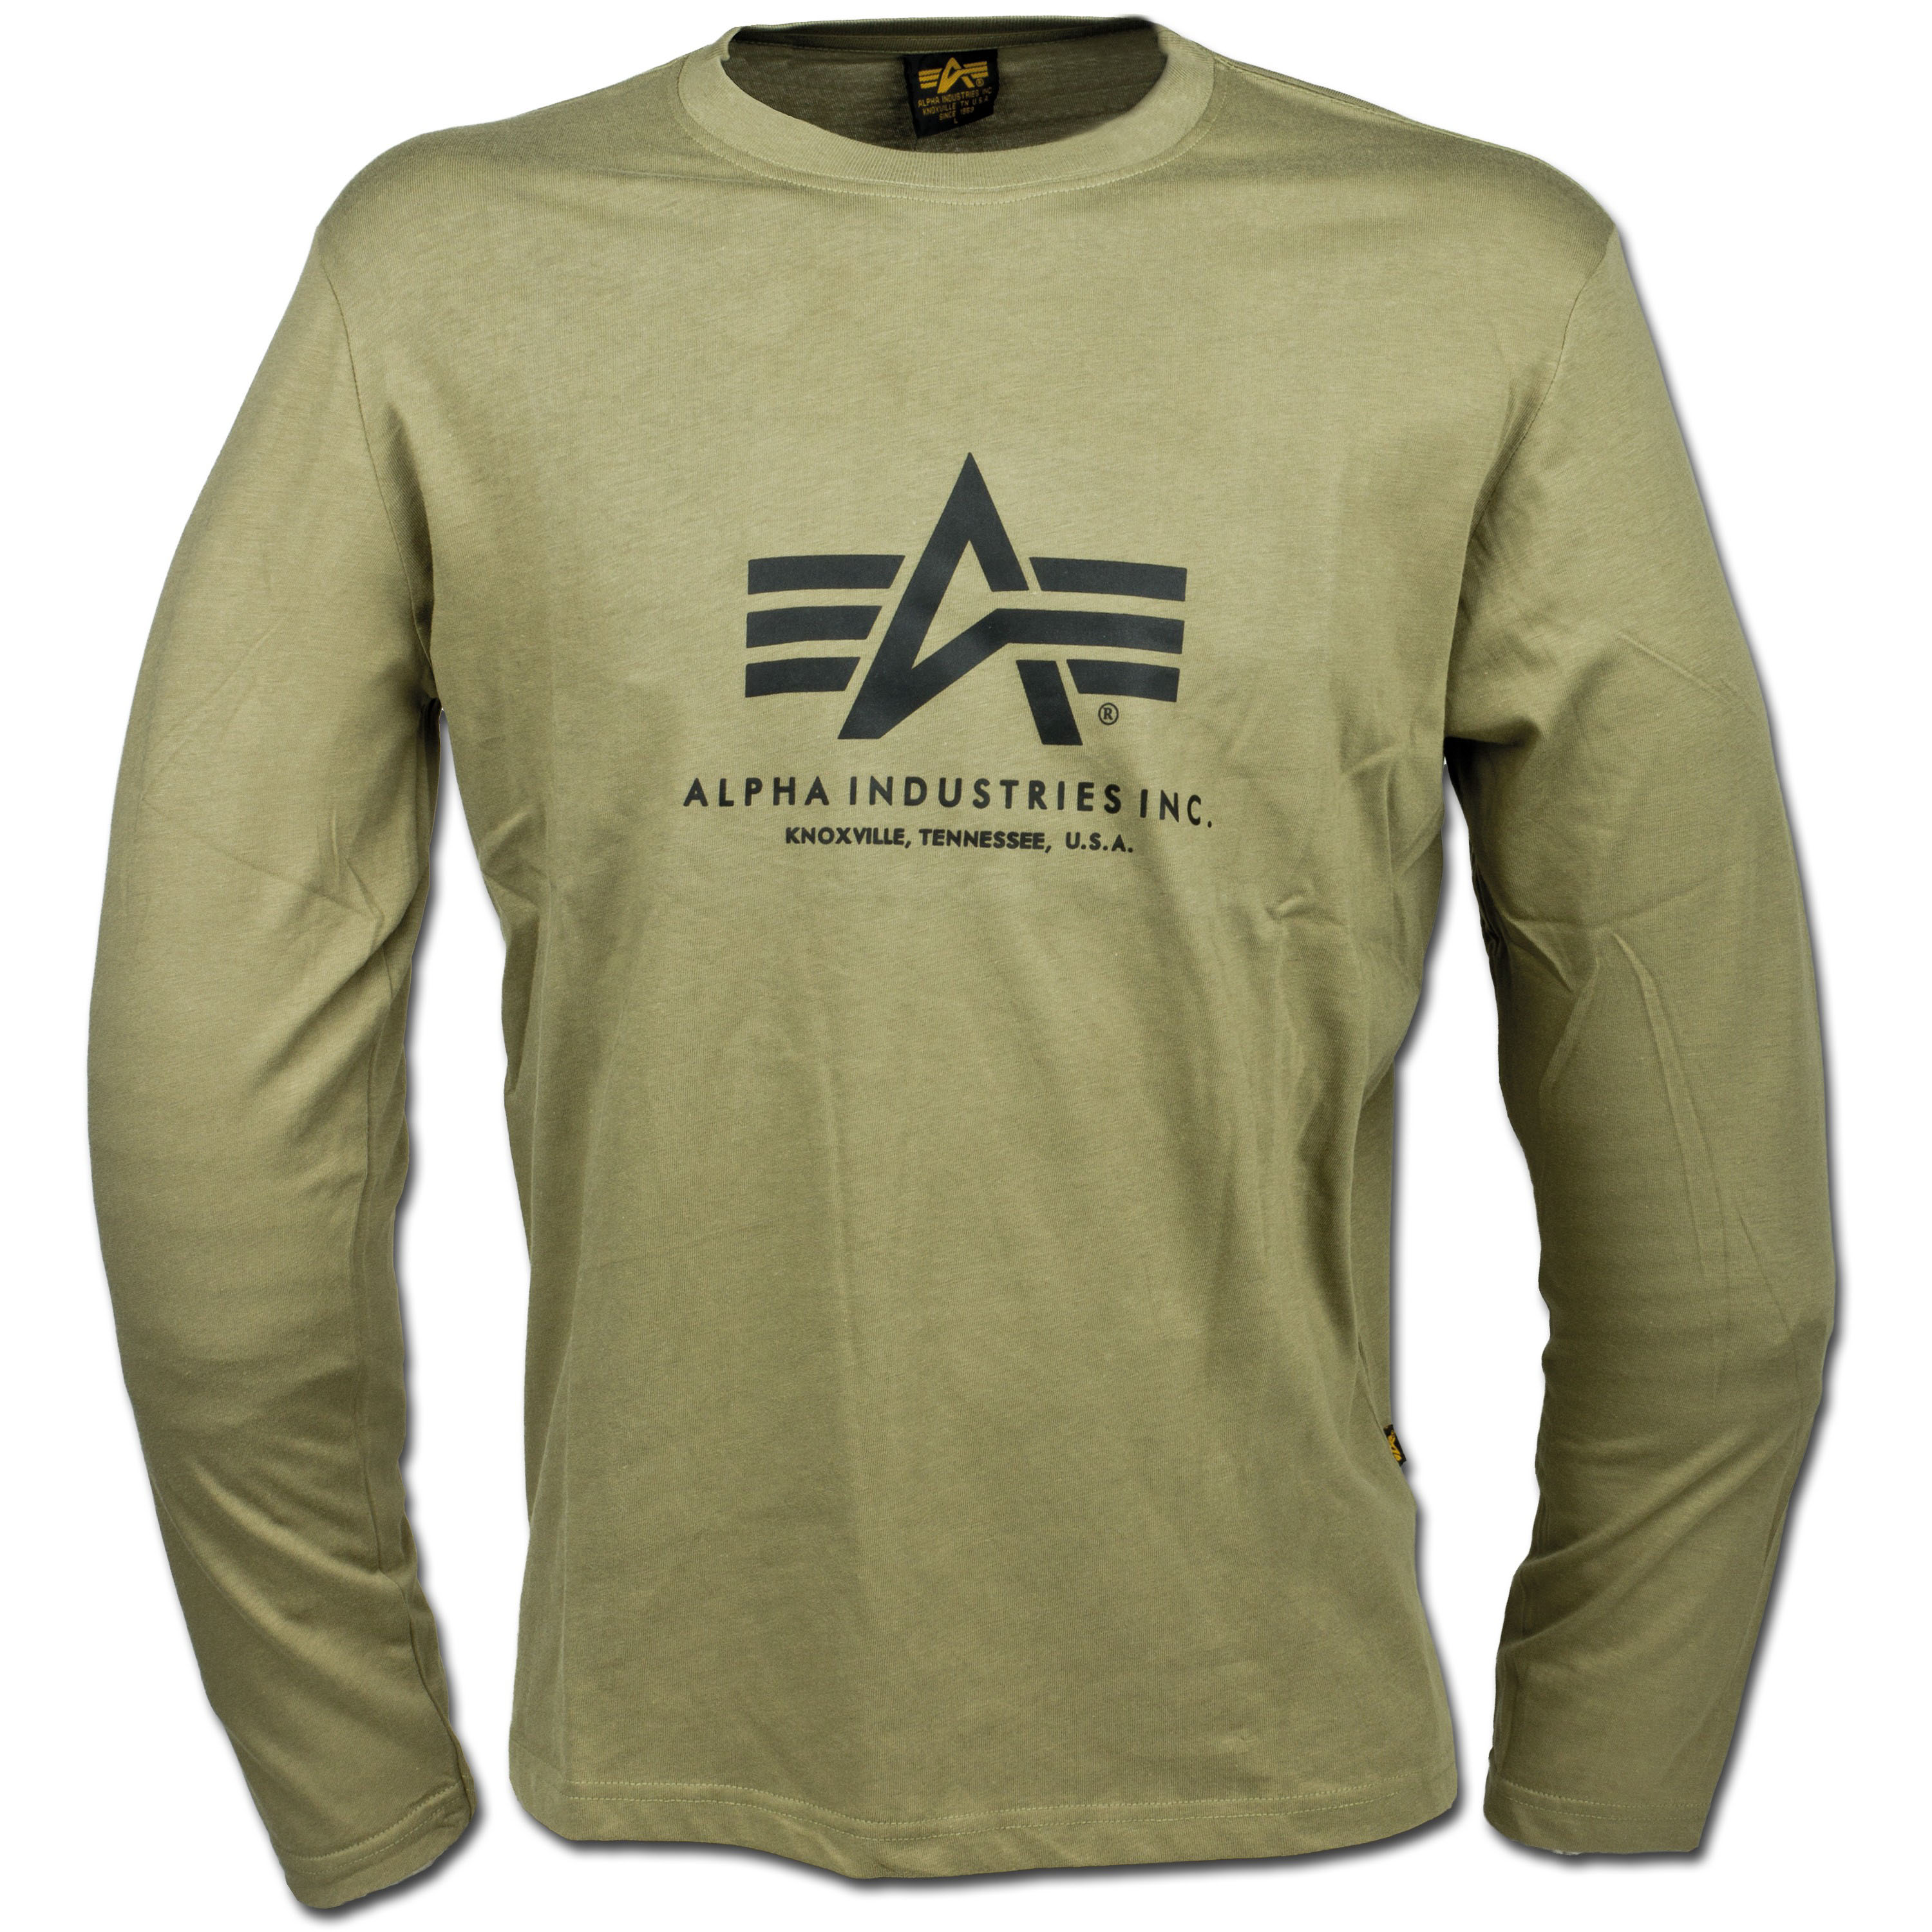 T-Shirt Alpha Industries Long Arm olive | T-Shirt Alpha Industries Long Arm  olive | Shirts | Shirts | Men | Clothing